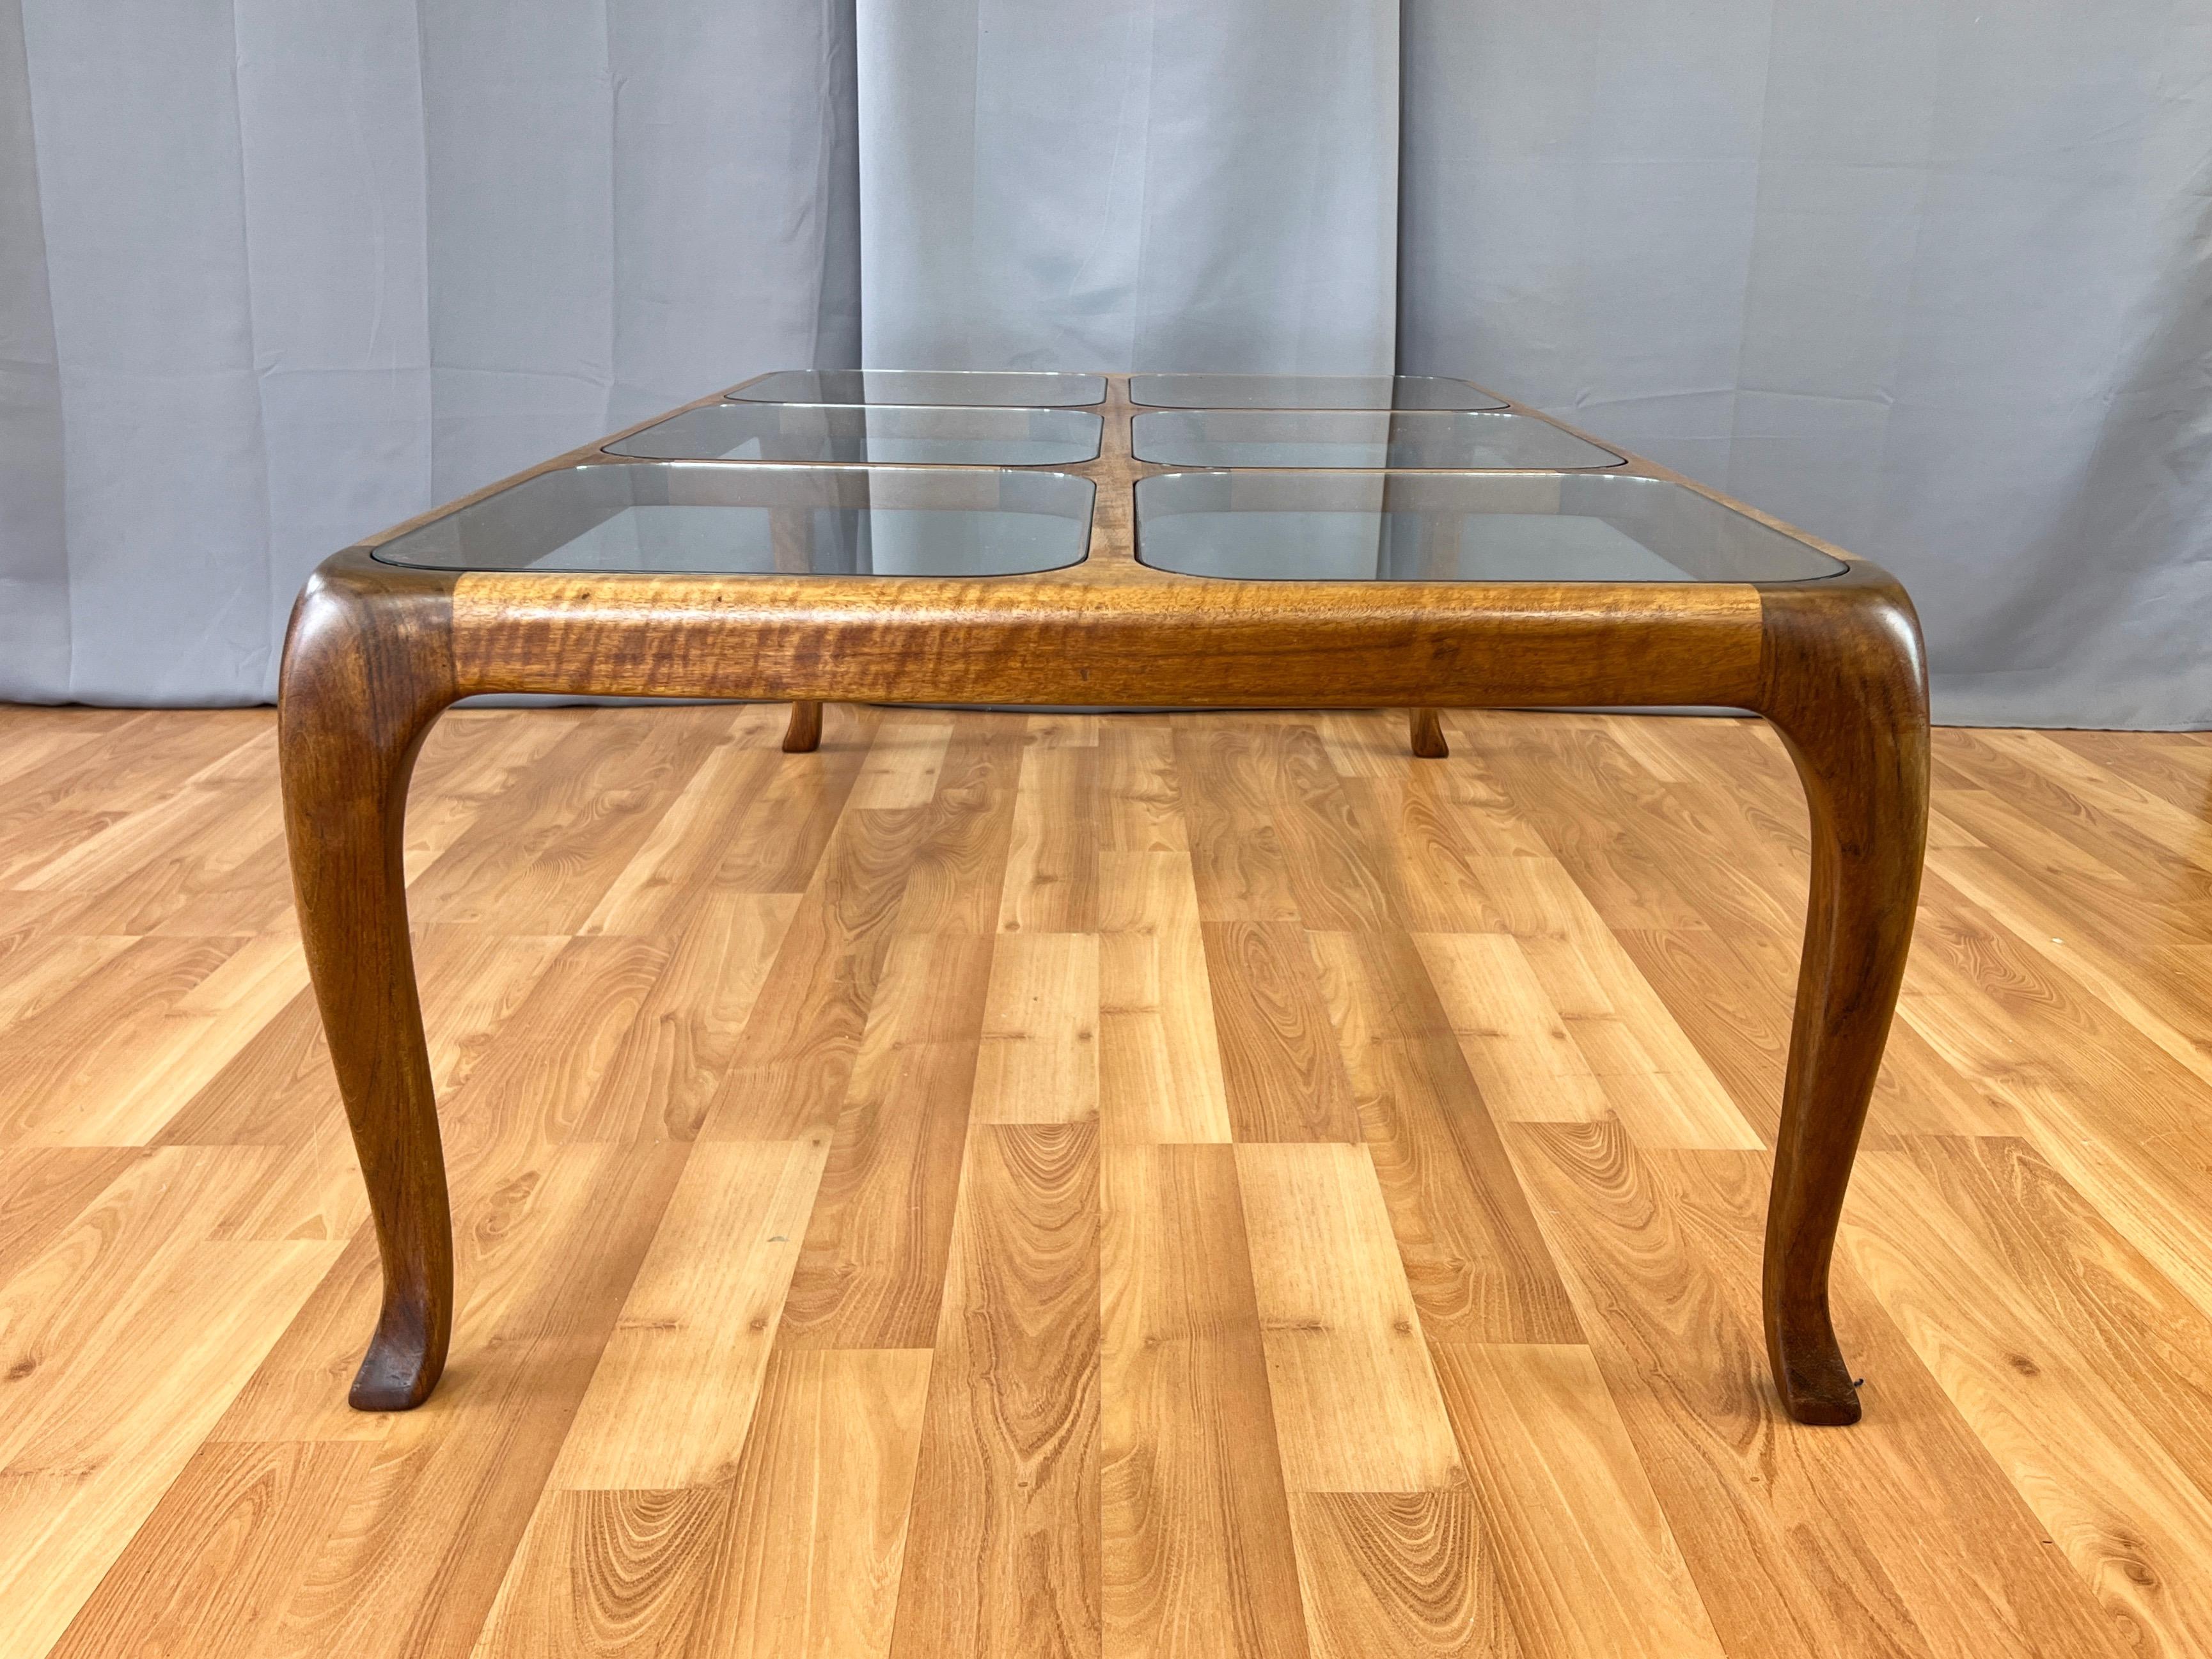 Thomas Saydah Large Walnut and Glass Coffee Table, Signed and Dated, 1982 For Sale 9